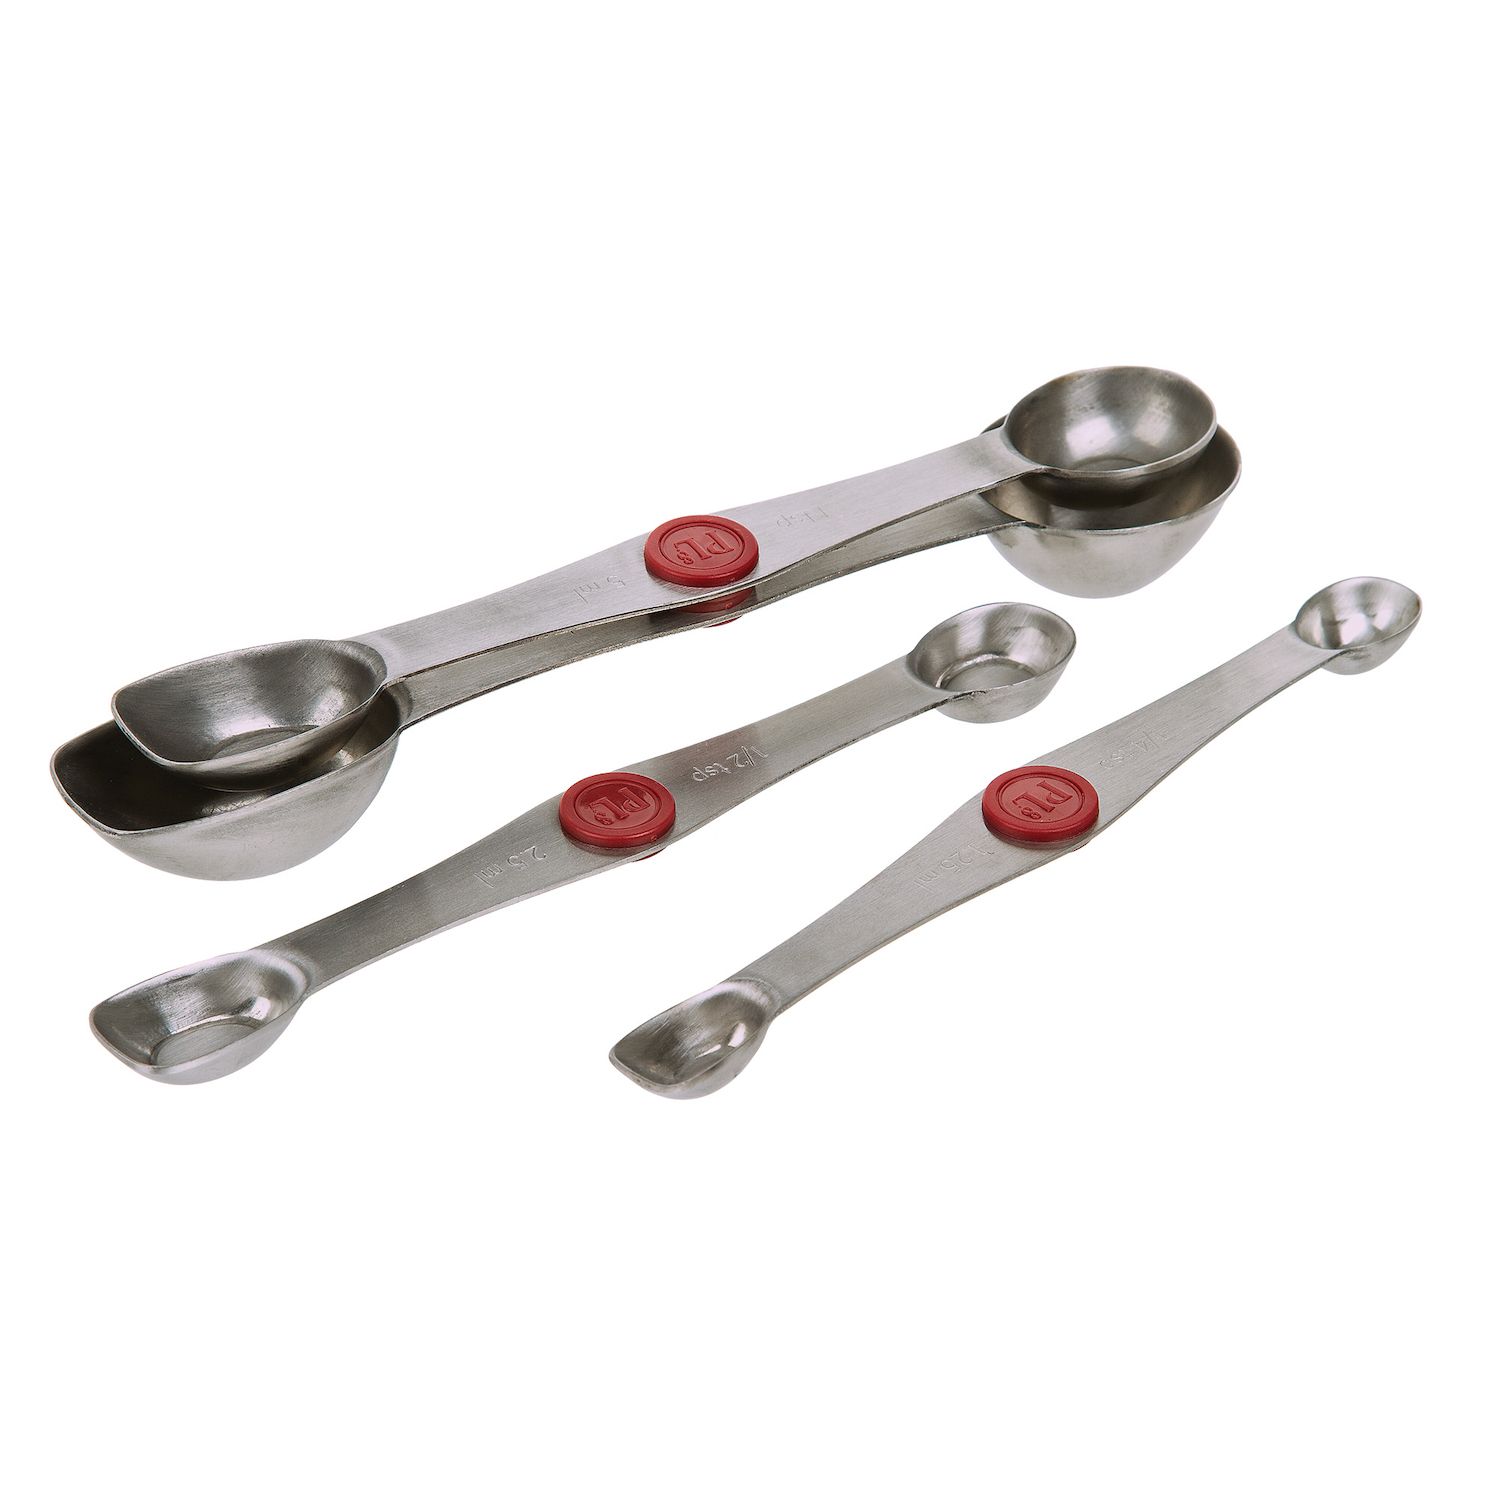 Zulay Kitchen Magnetic Measuring Spoons with Leveler - Silver